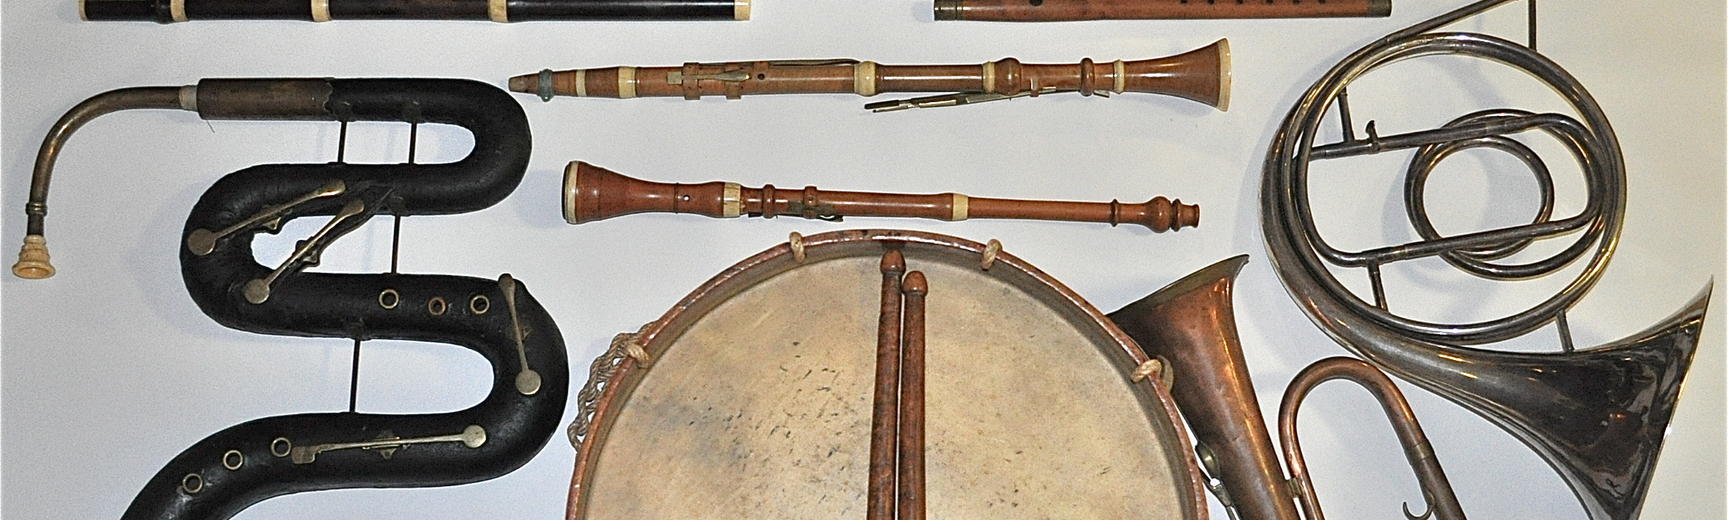 Instruments from the Bate